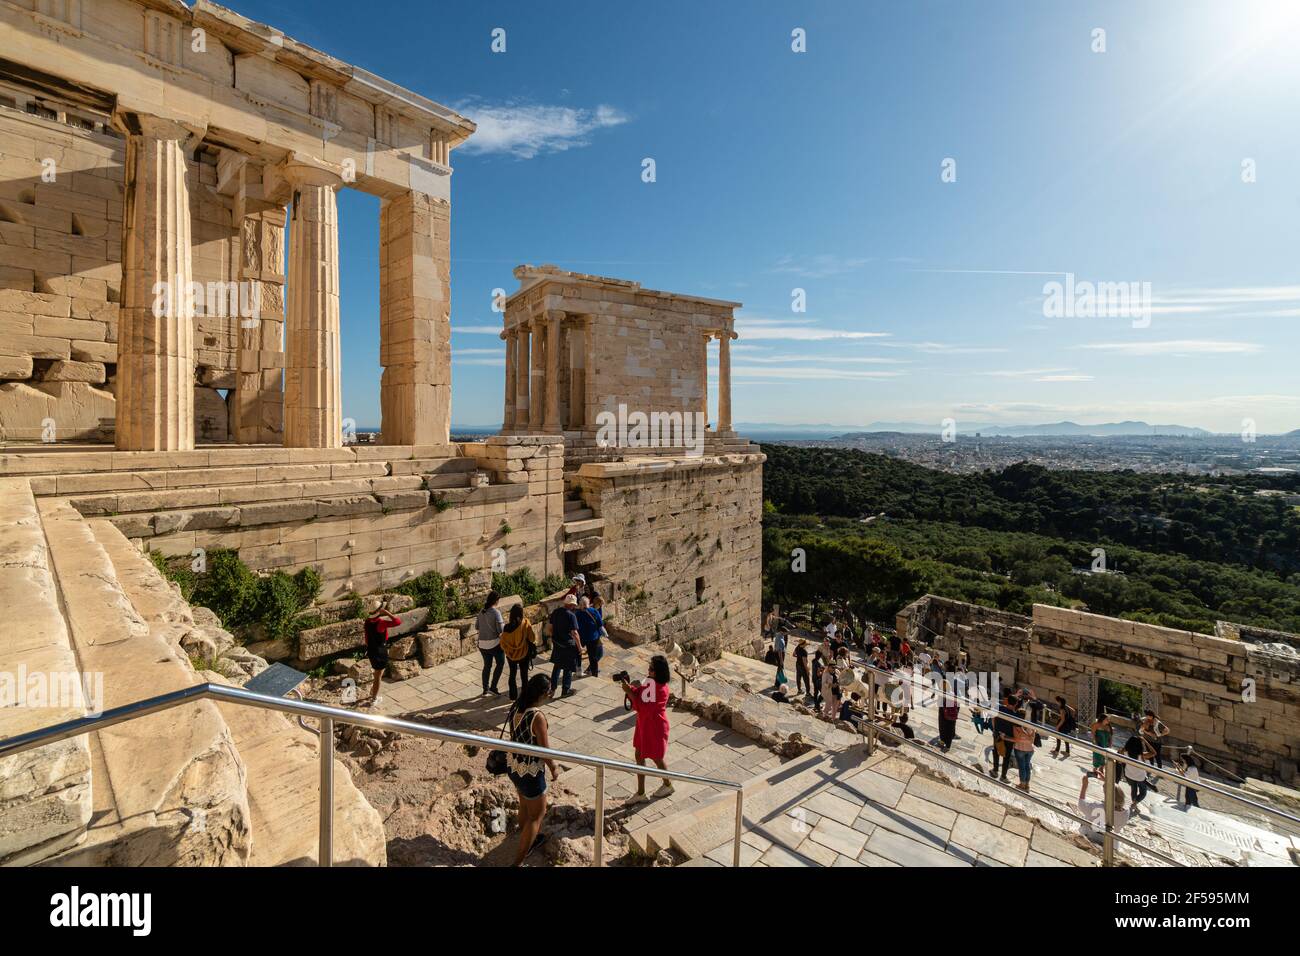 Athens, Greece - May 07 2020: Tourists visit the famous Acrropolis and the  Temple of Athena Nike temple overlooking Athens Stock Photo - Alamy